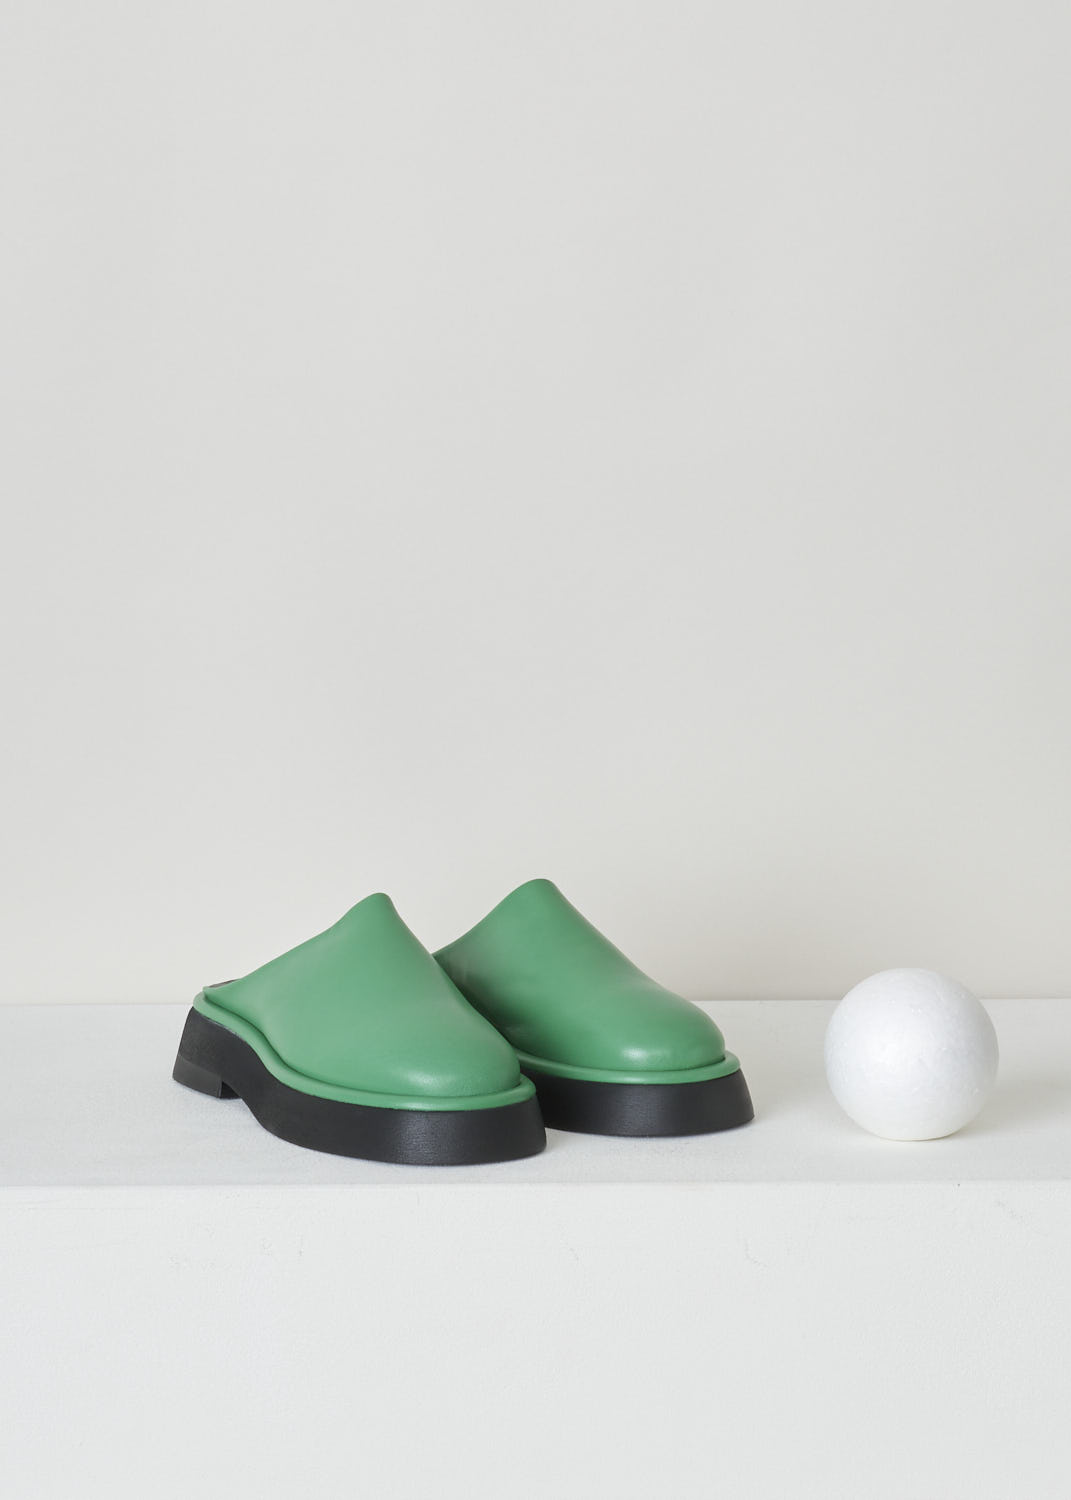 WANDLER, EMERALD GREEN SLIDES, ROSA_SLIDE_22202_741201_2687_EMERALD, Green, Front, These emerald green slip-on slides have a round toe section and flat thick, rubber sole. 
